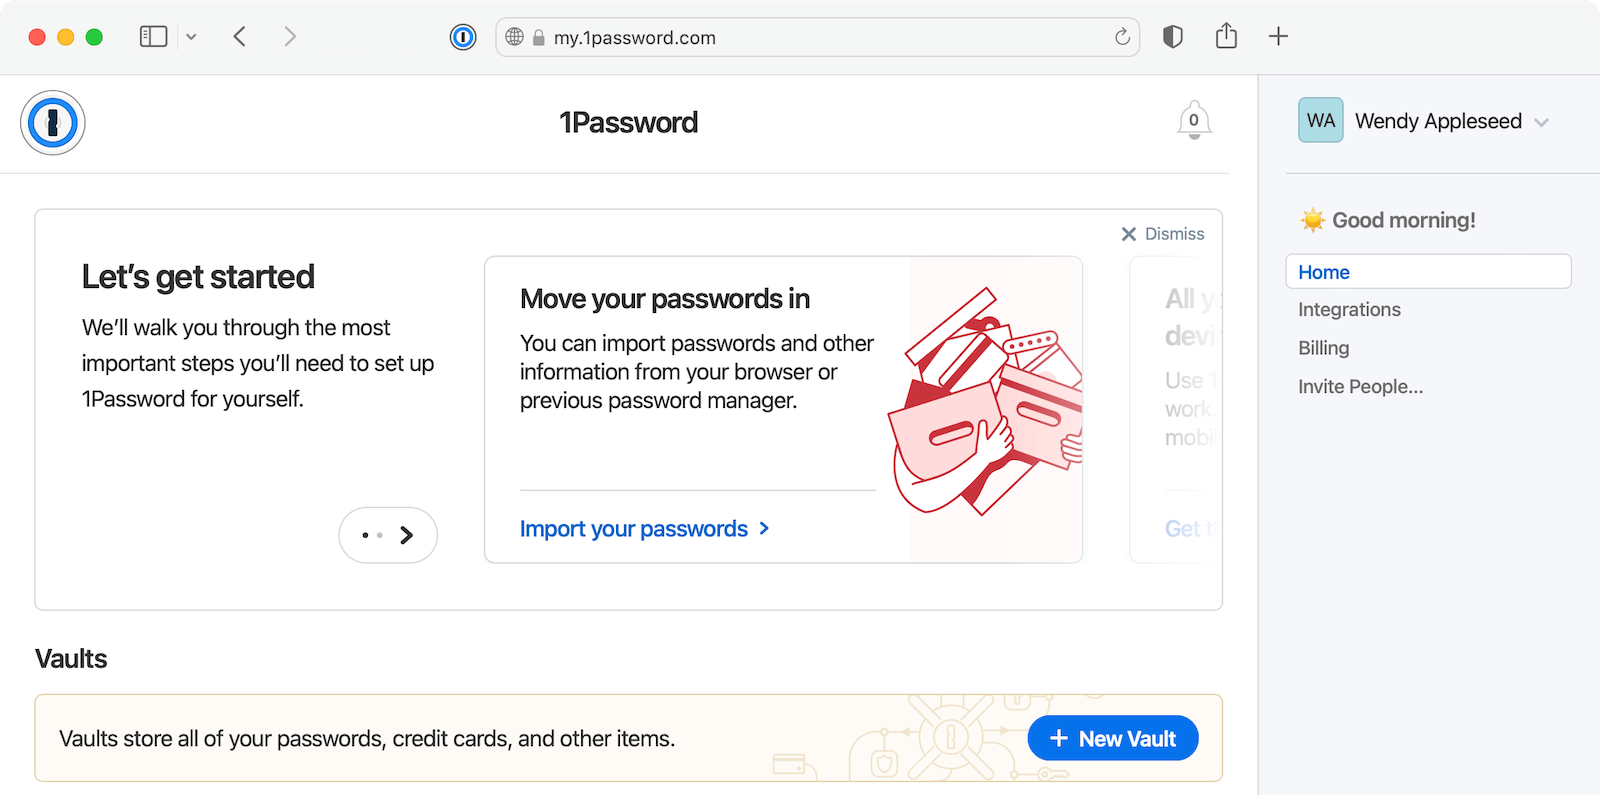 The Home page on 1Password.com